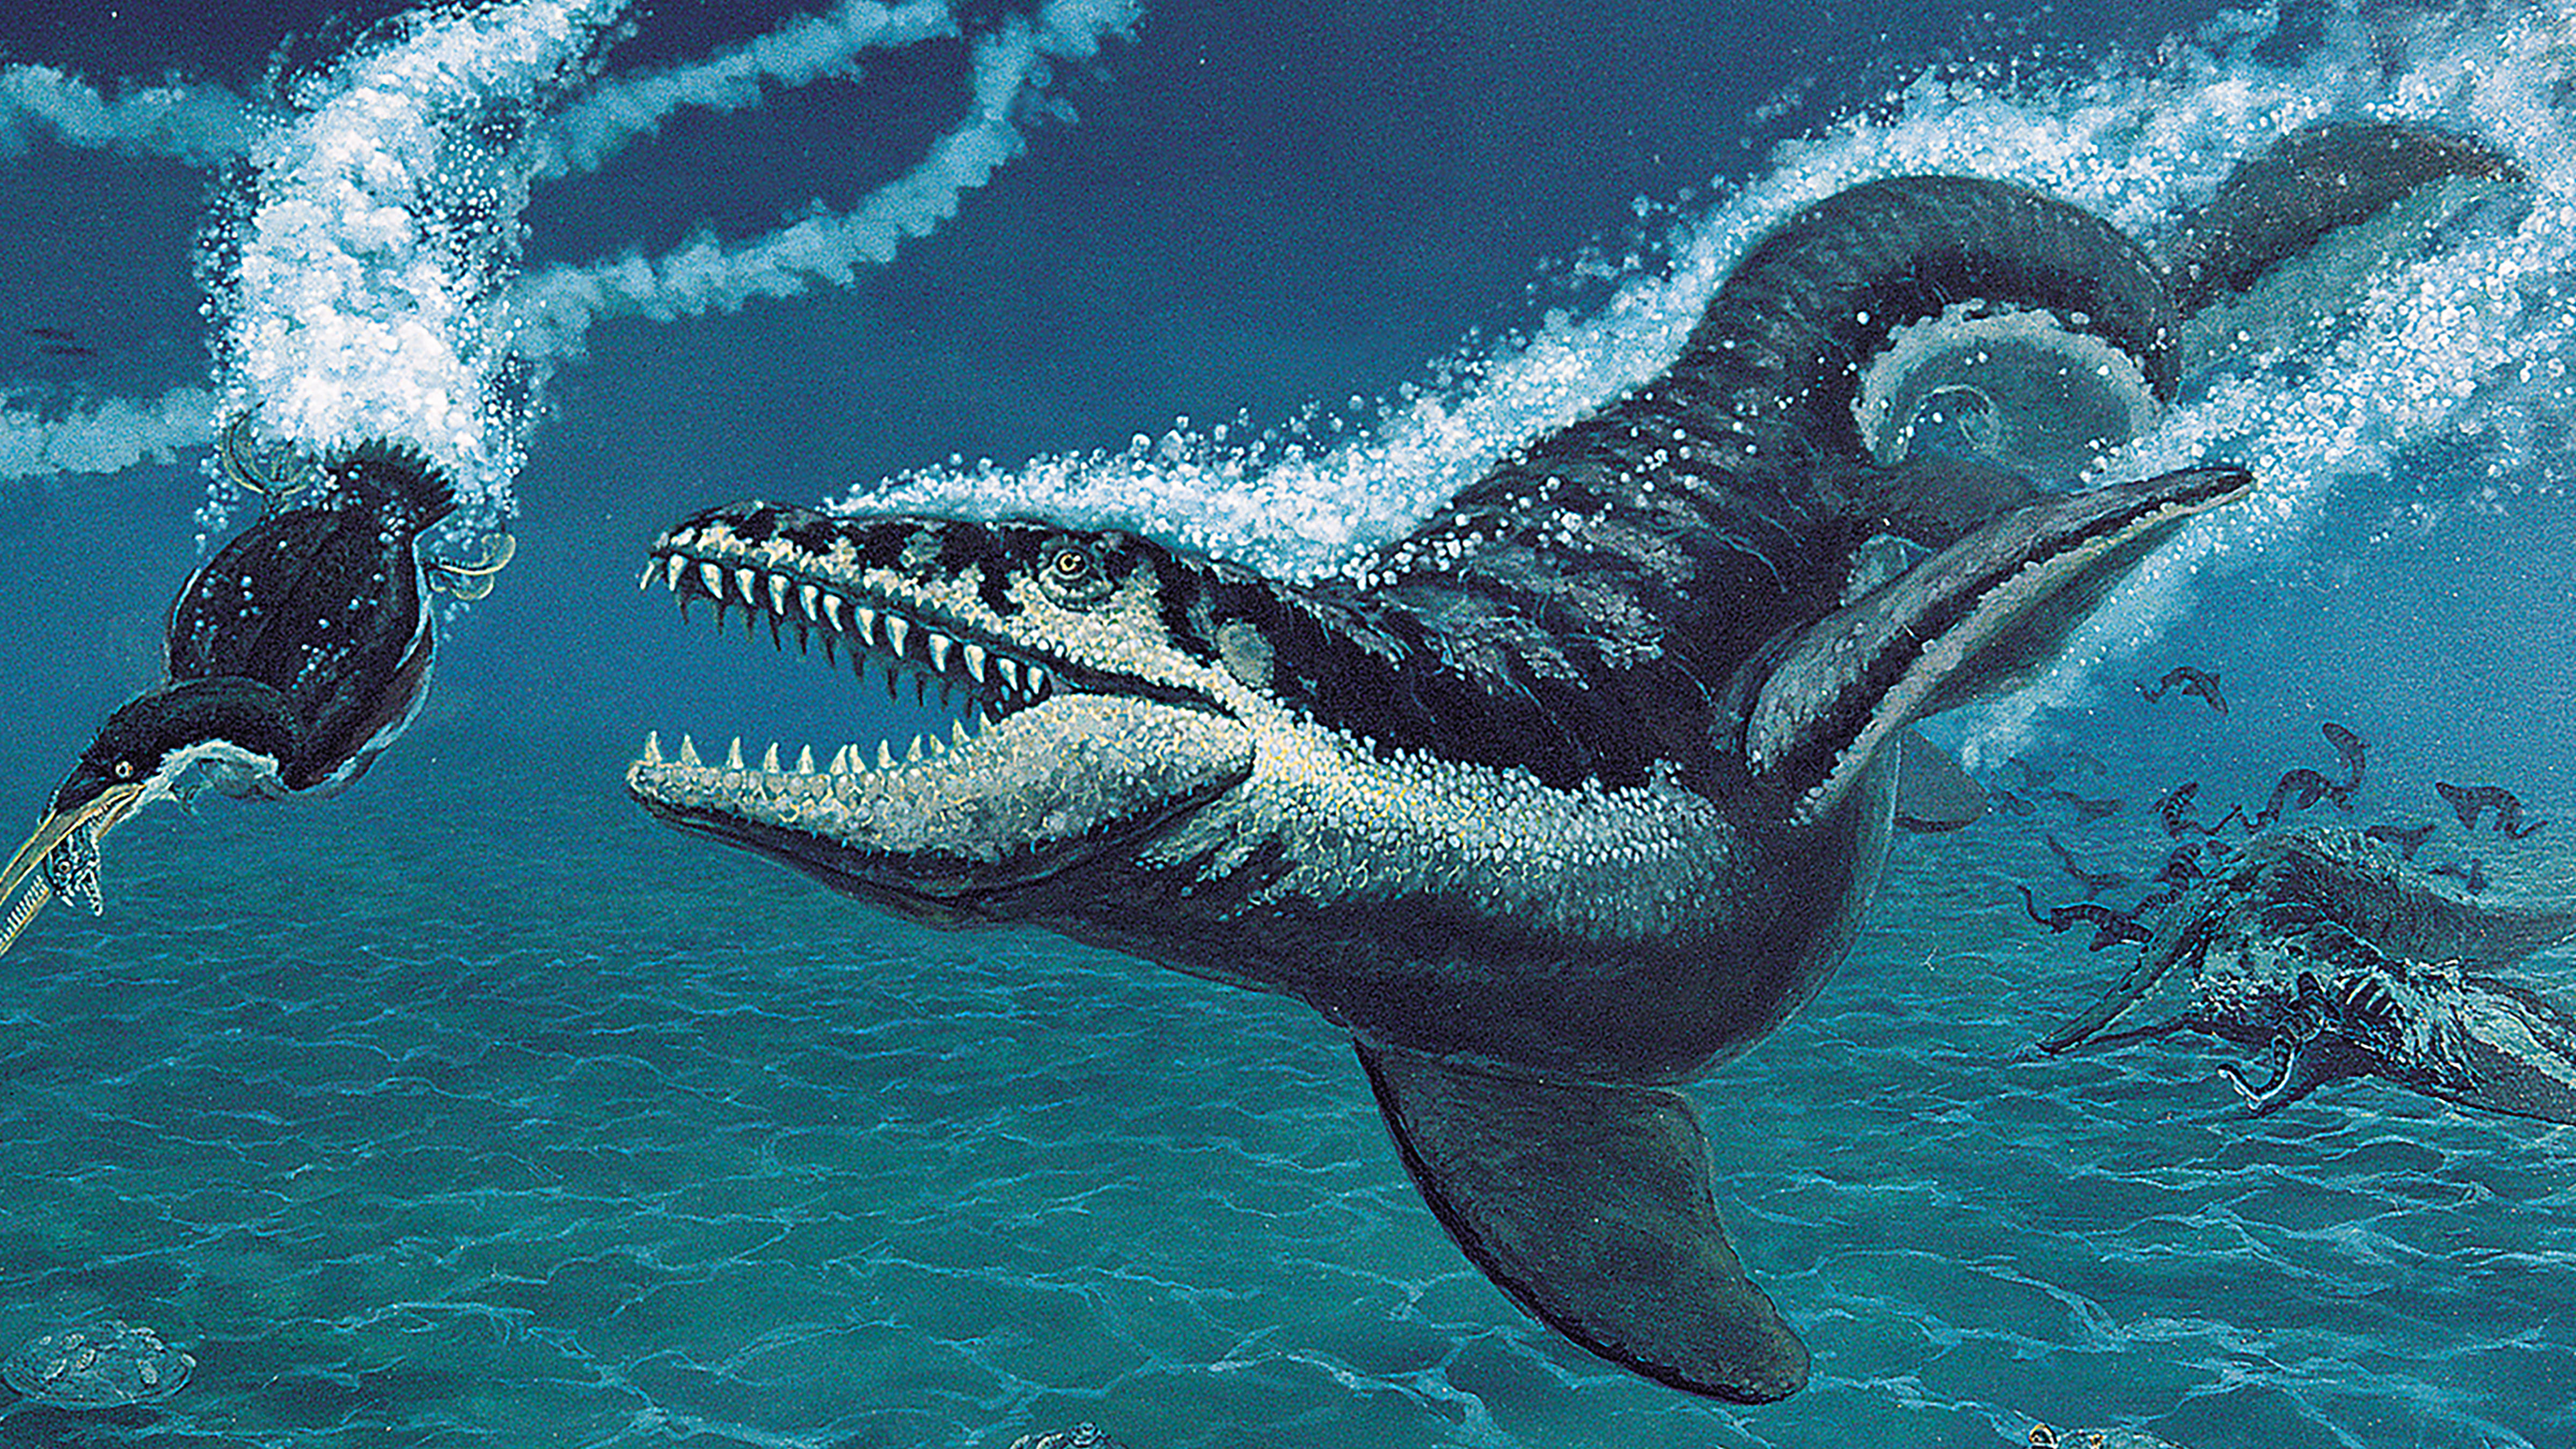 North Dakota fossils could be new species of ancient marine reptile - CBS News4800 x 2700